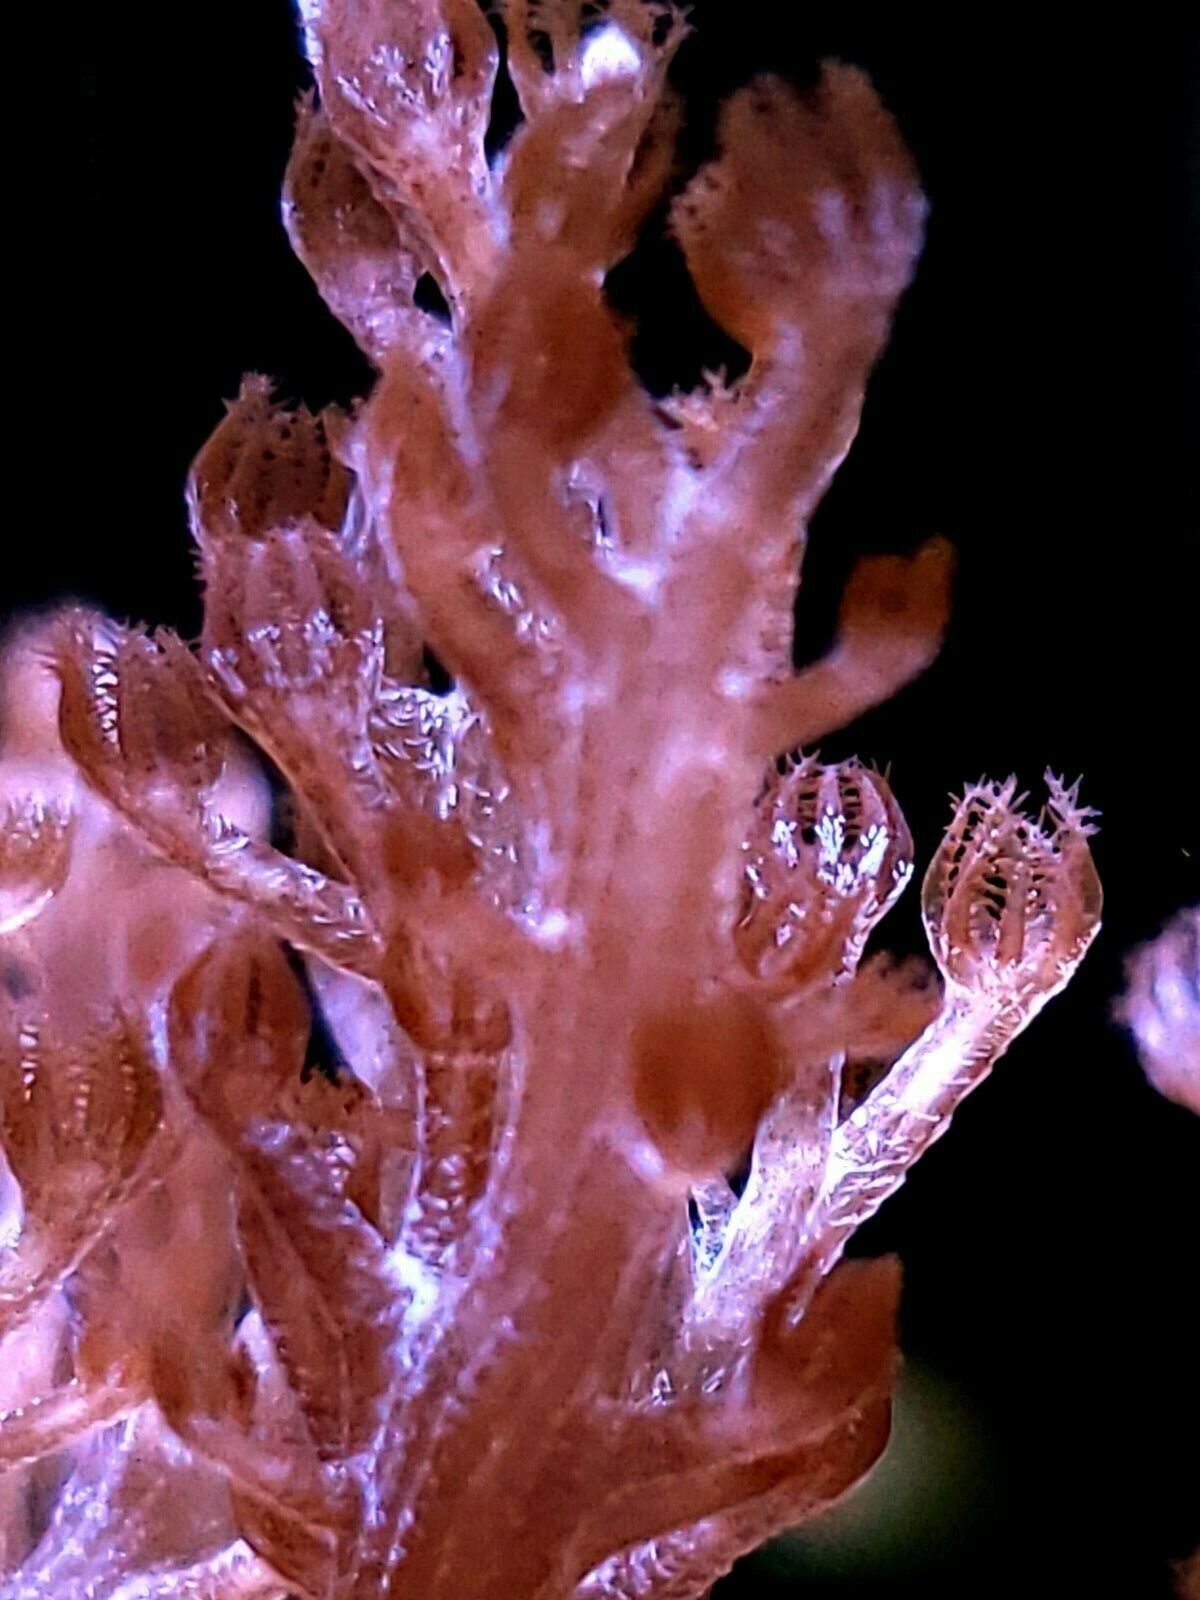 Live coral wysiwyg: X-LG PINK TREE CORAL BEAUTIFUL PIECE RARE PINK 30+BRANCHES